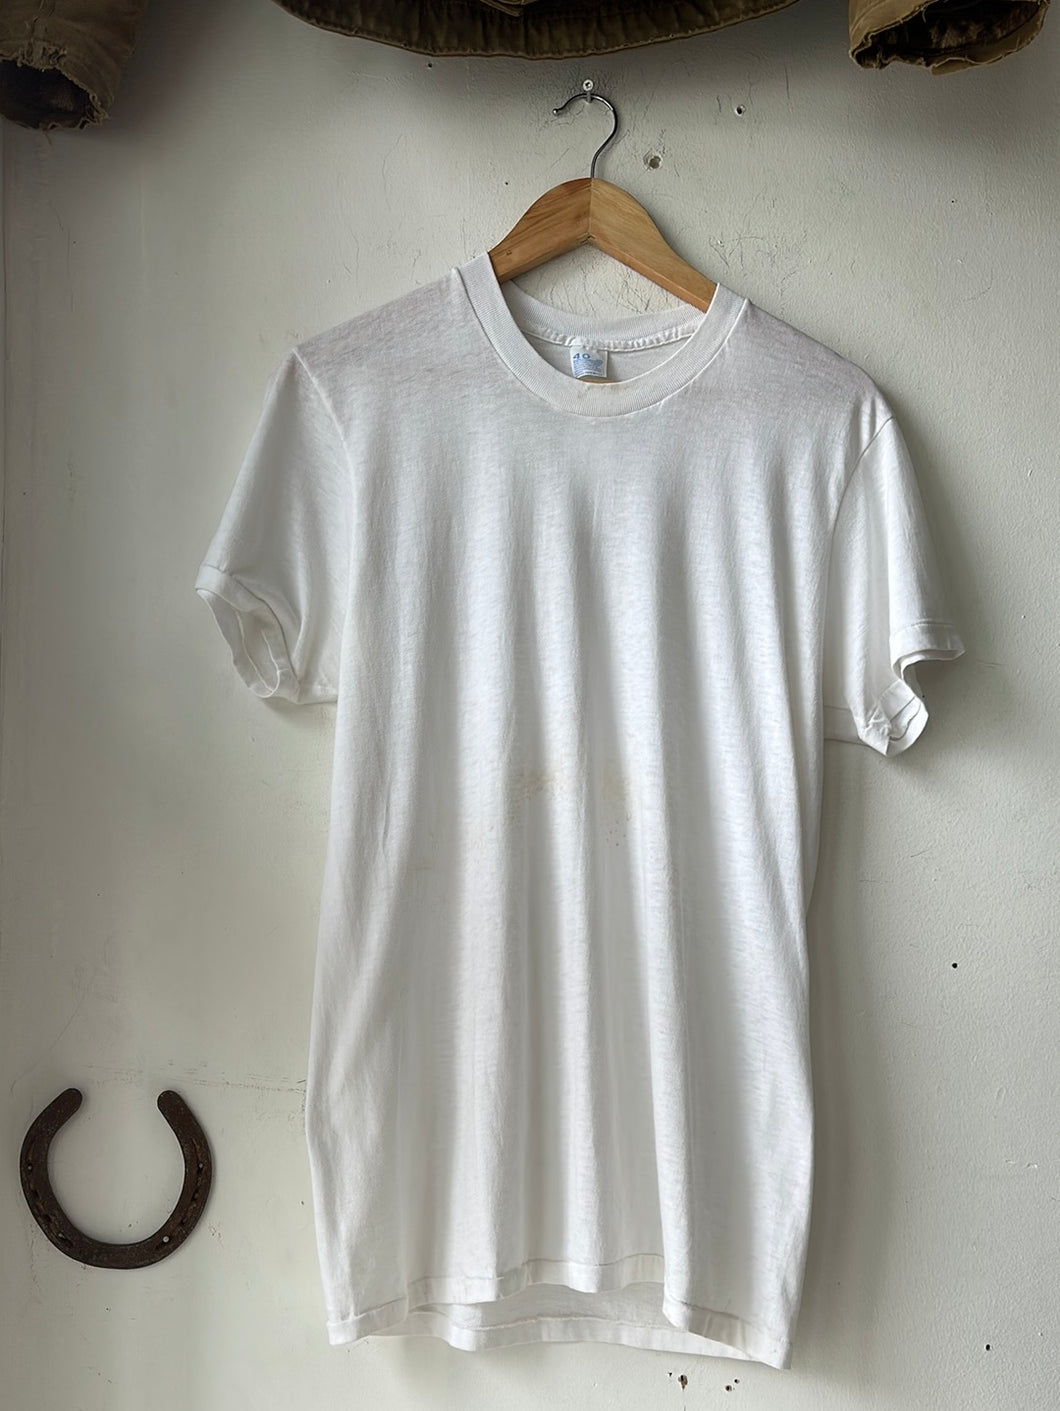 1970s/'80s JCPenney Blank Tee